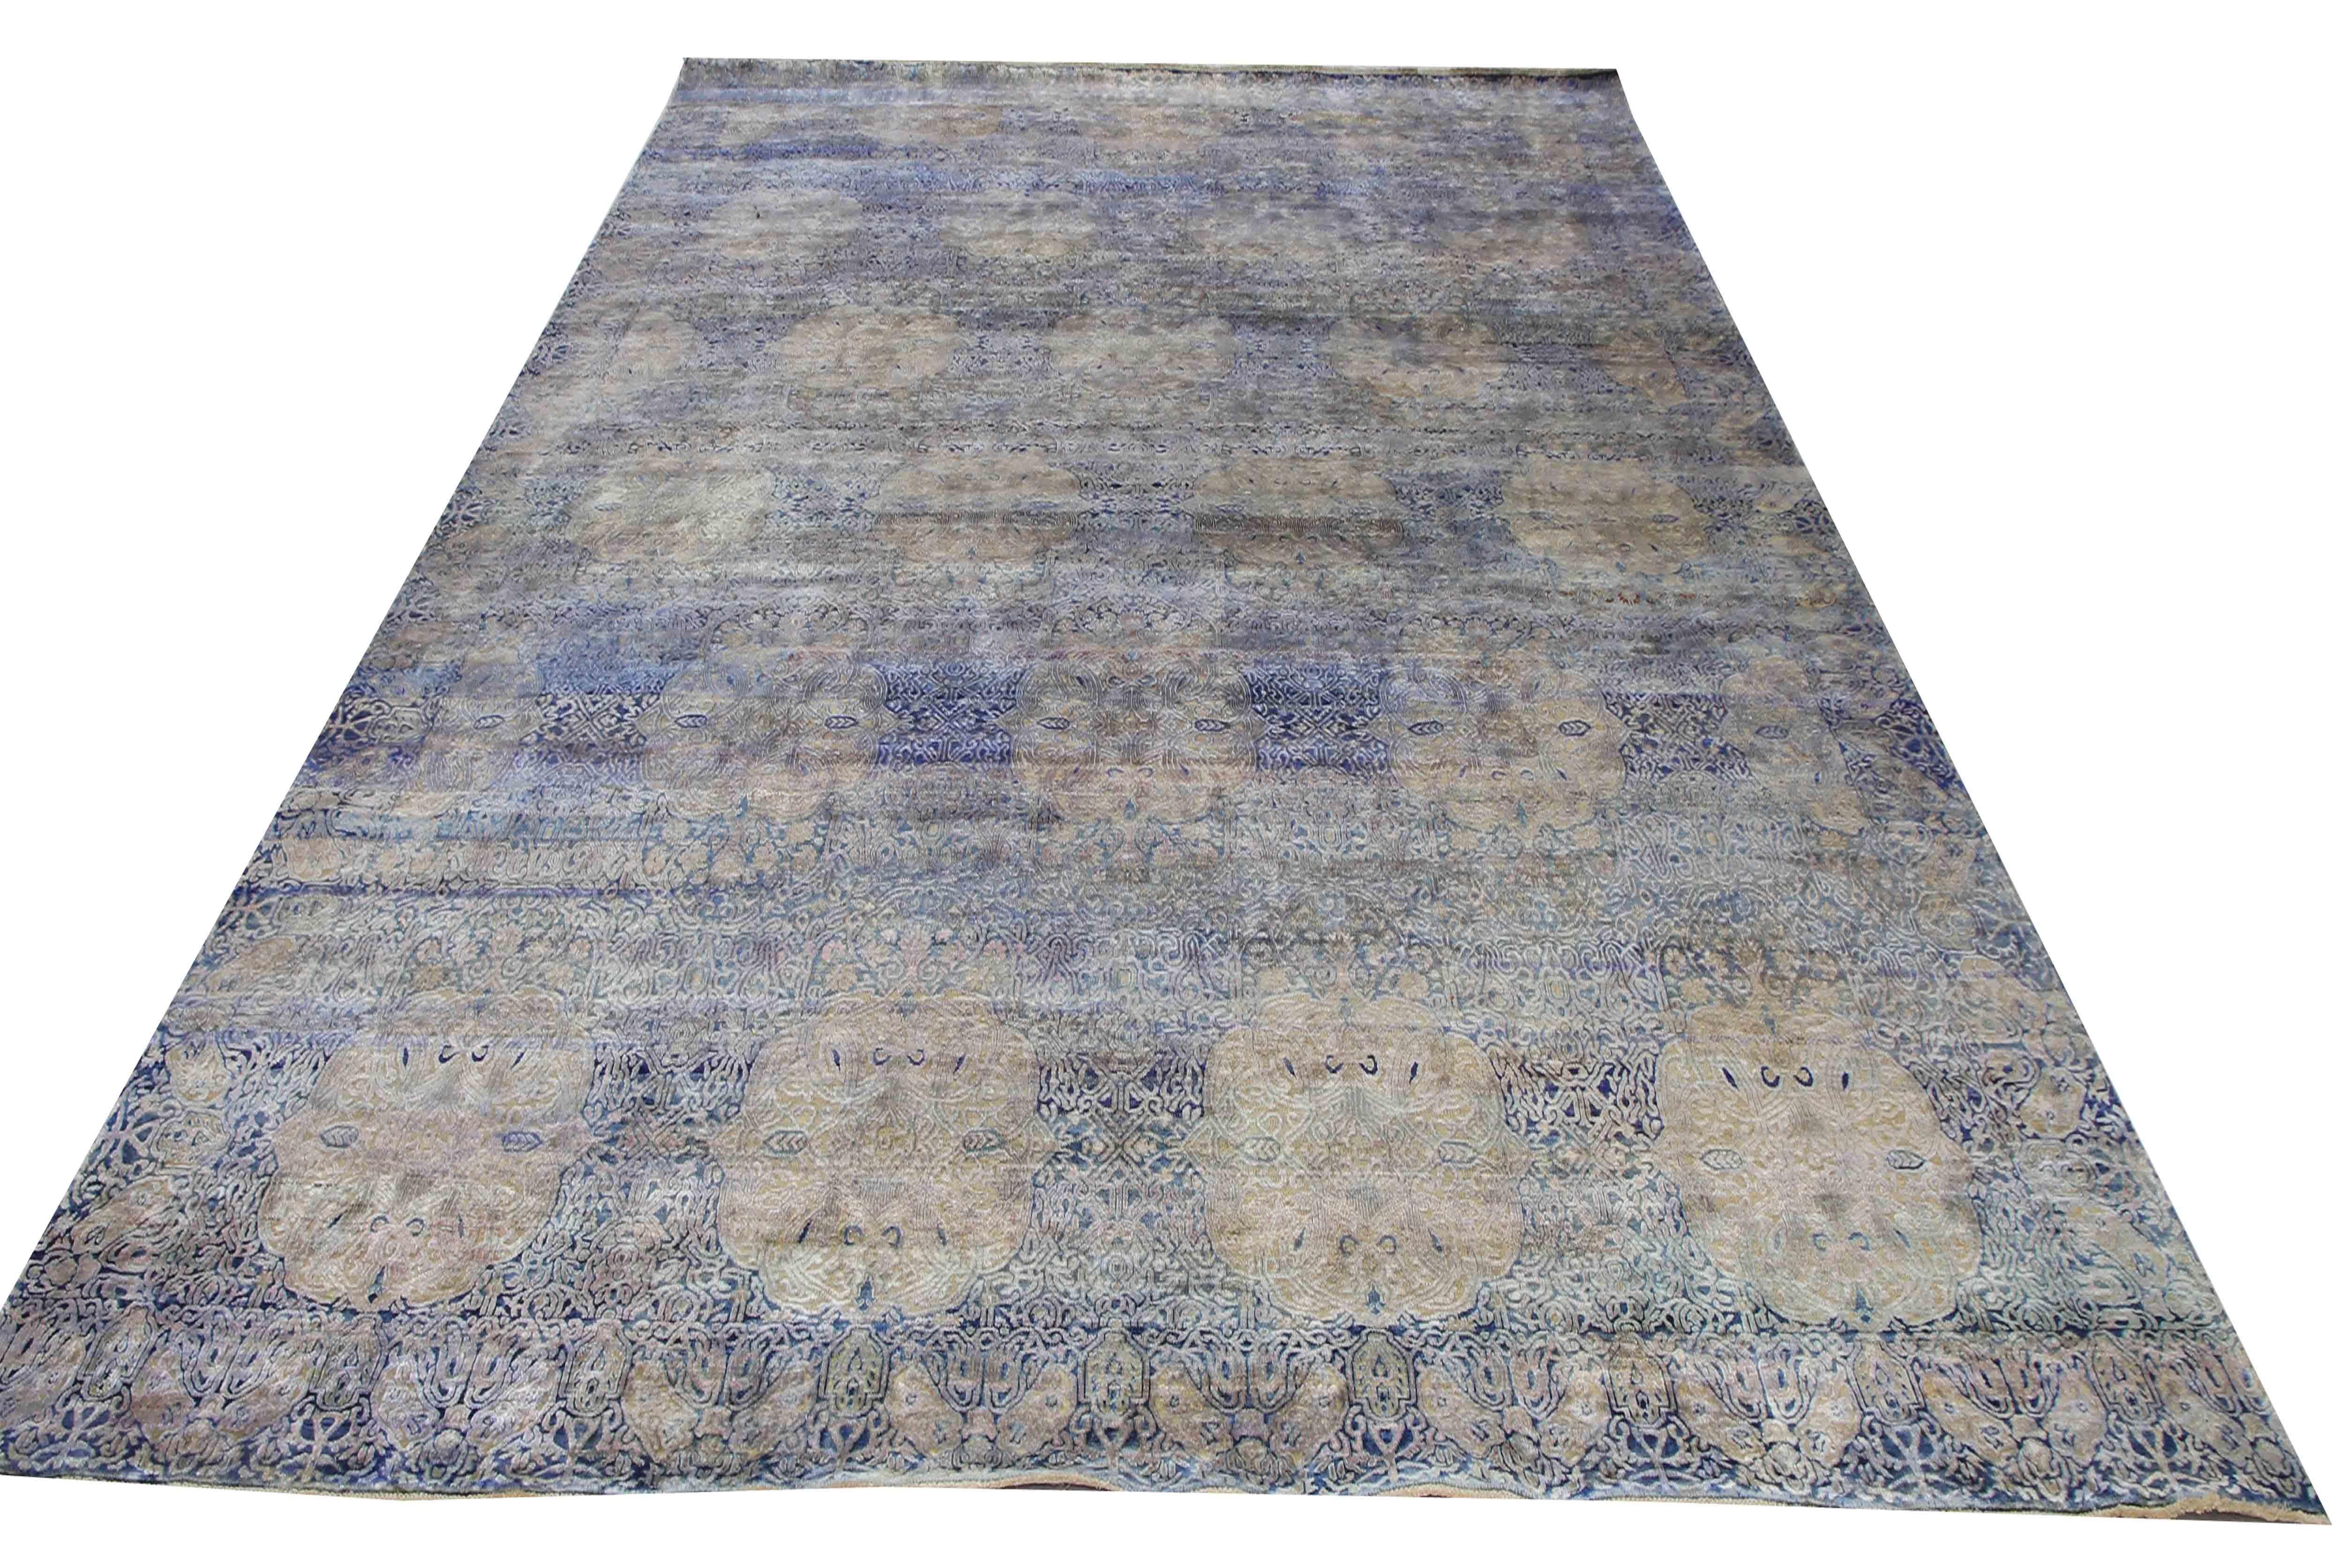 This stunning silk and wool rug measures 11'9